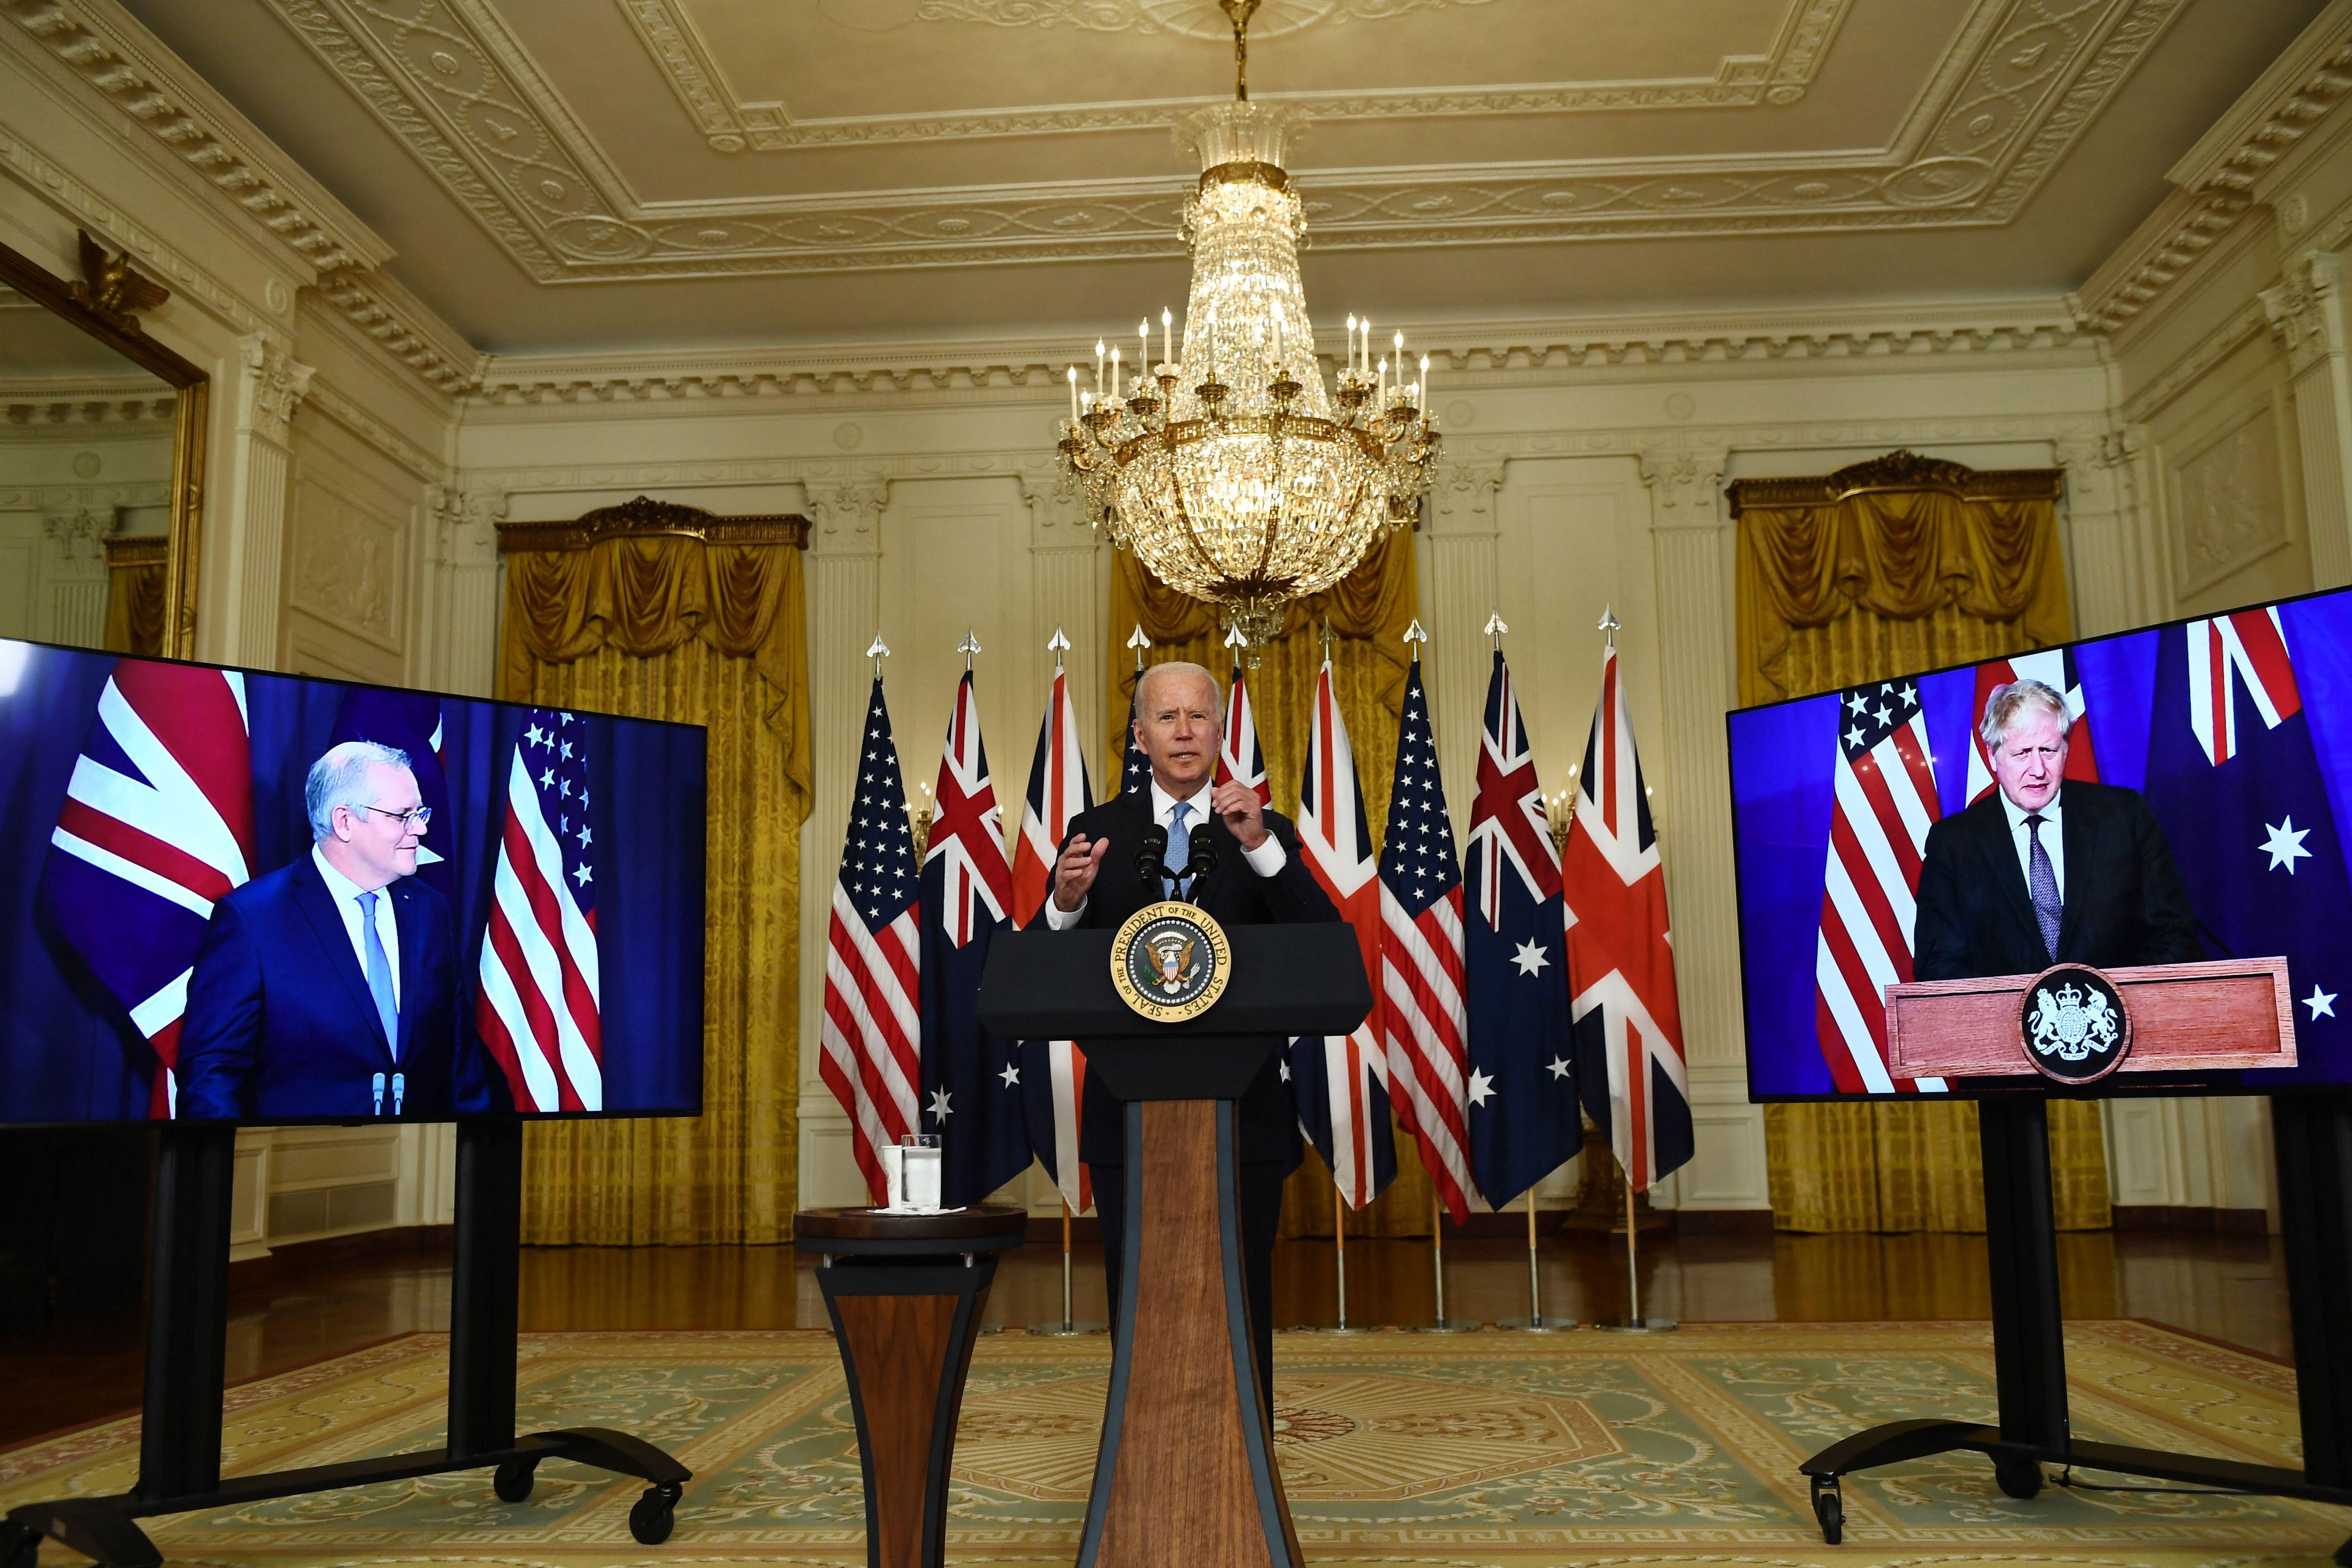 U.S. President Joe Biden participates is a virtual press conference with British Prime Minister Boris Johnson (right) and Australian Prime Minister Scott Morrison in the East Room of the White House in Washington, D.C. on September 15, 2021. (Photo: Brendan Smialowski/AFP via Getty Images)